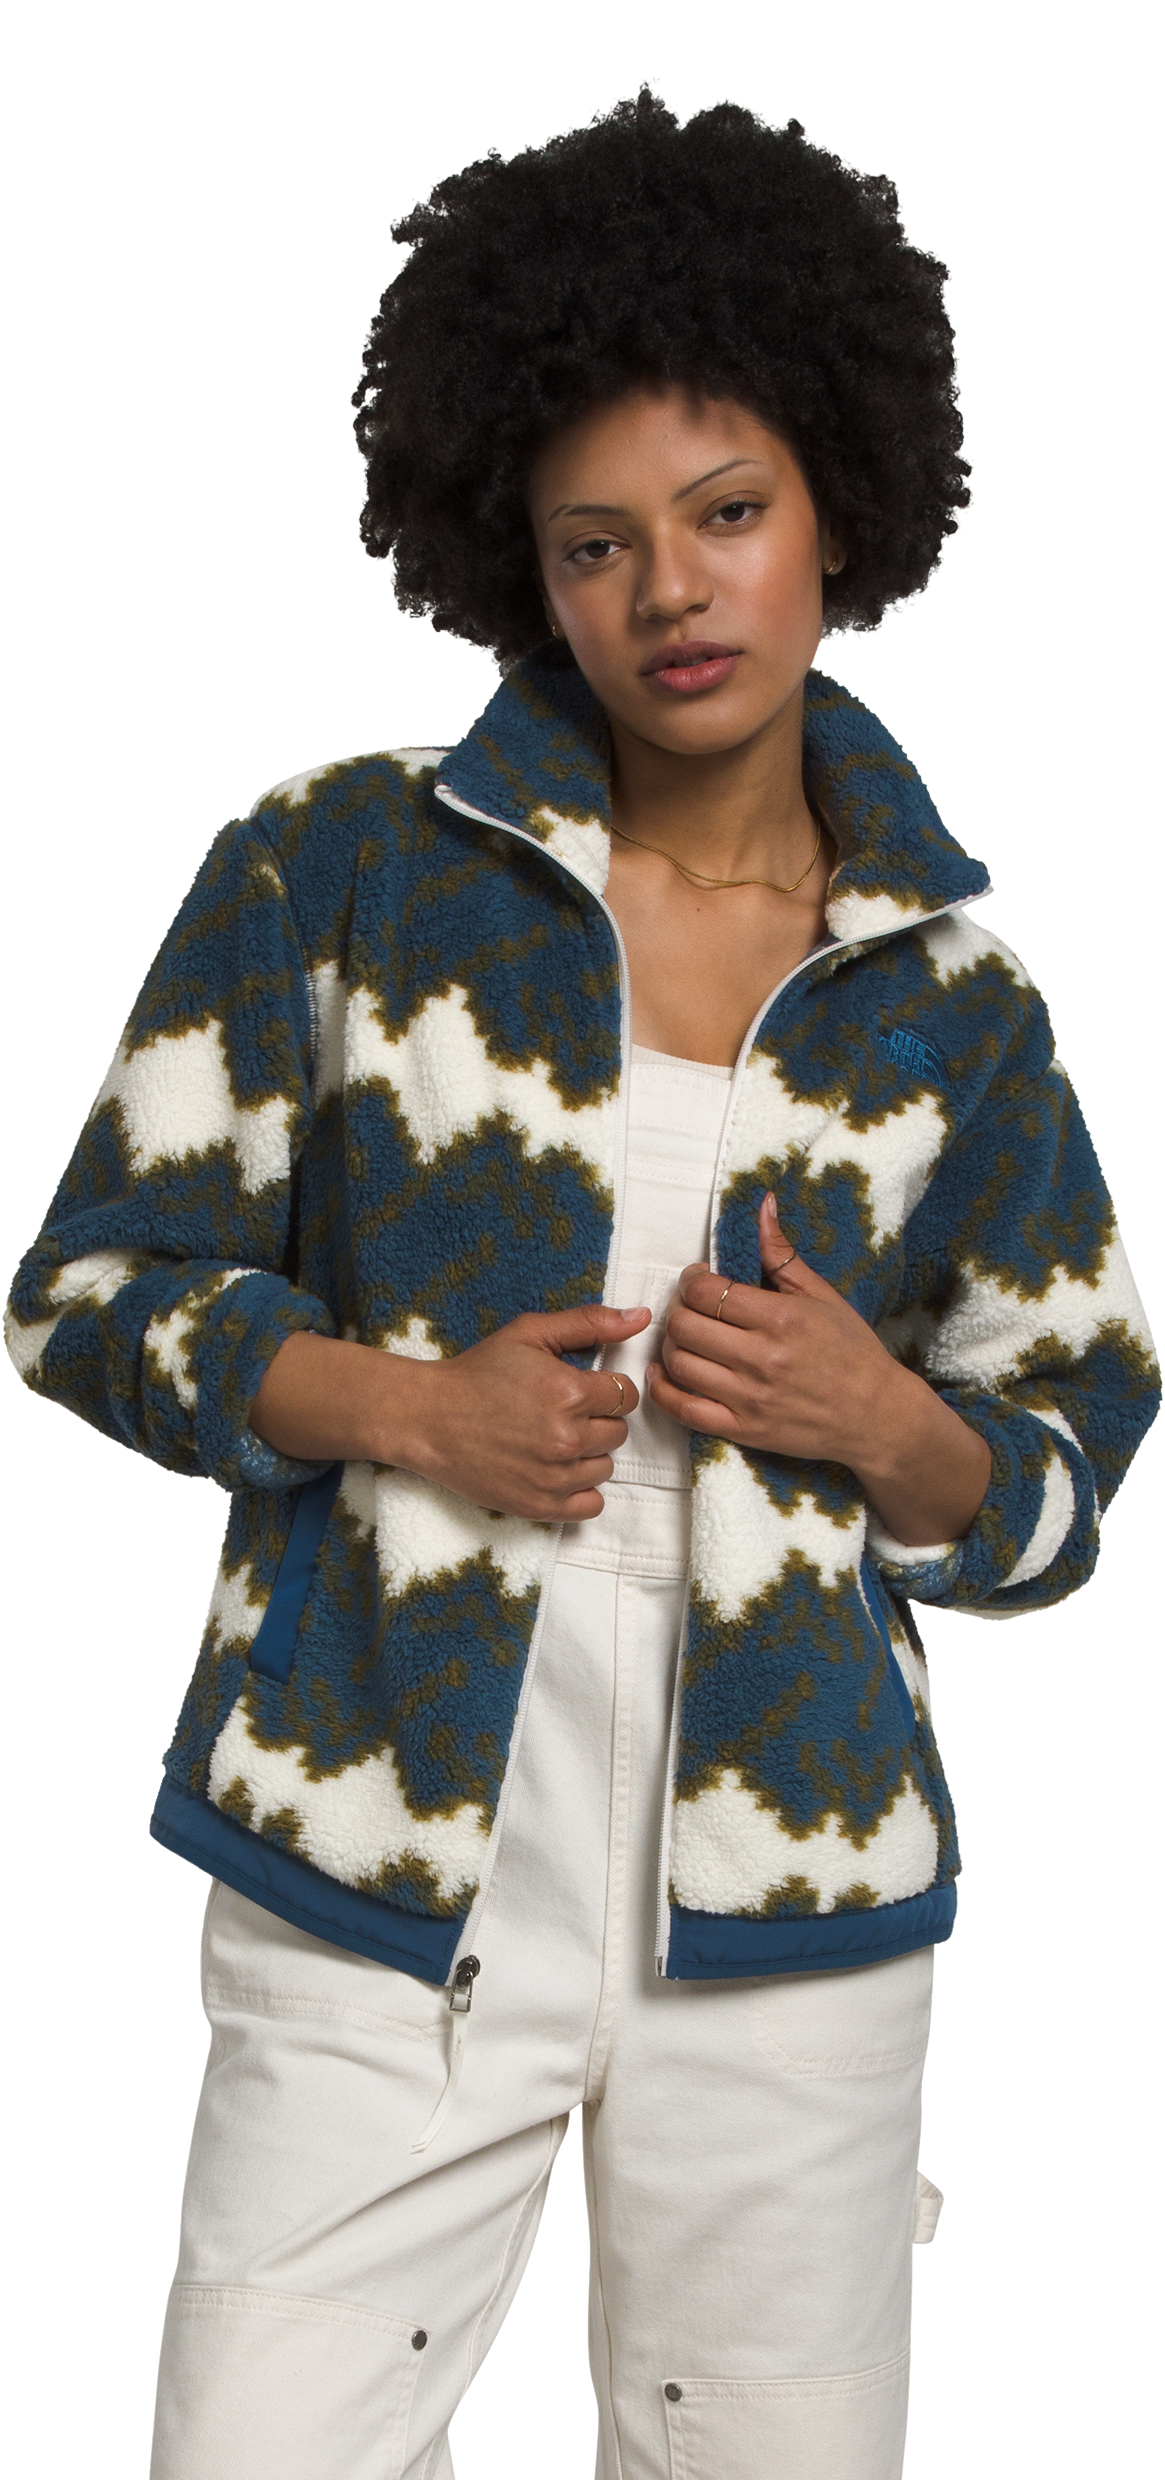 The North Face Campshire Fleece Jacket for Ladies - Shady Blue Mountain Geo Print - M